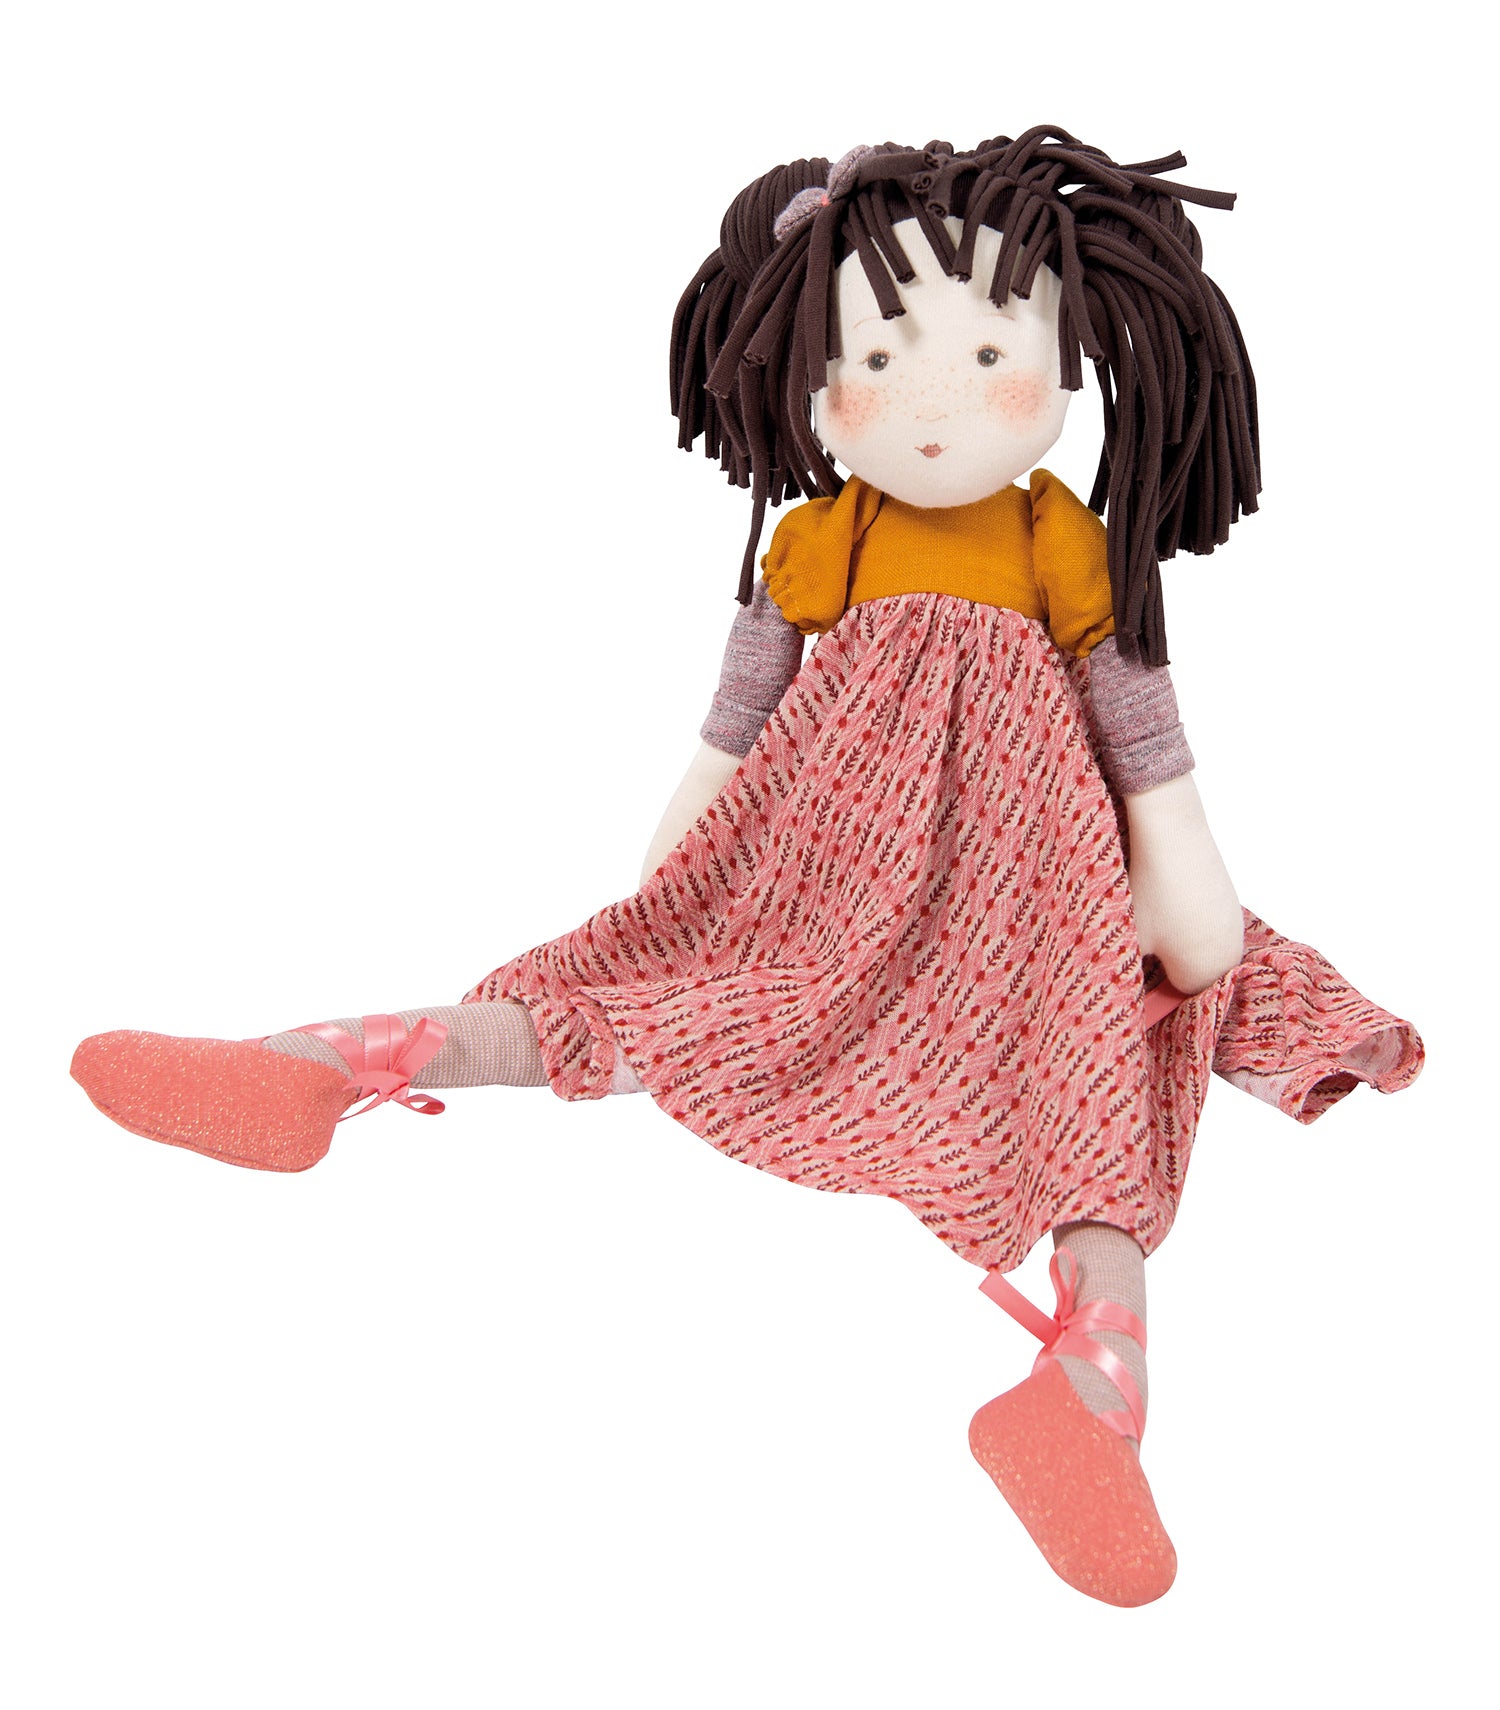 <h5>Description</h5>
<p>The beautiful Rosalies collection is designed to play but will also fit perfectly in an enchanted decor.<br>New in 2023, Prunelle is a medium sized rag doll with a soft face delicately illustrated and printed, and long dark hair in rolled jersey.<br>She wears a printed multicolored pink dress with safran top and ruffles on the shoulders.<br>Ready for ballet, she has point shoes with with satin ribbons.  </p>
<h5>Specifications</h5>
<p> <strong>Color</strong>: Pink<br><strong>Recommended Age</strong>: 10m+<br><strong>Material</strong>: cotton, Polyester, lurex, linen, viscose<br><strong>Size (inches)</strong>: L: 6 x W: 9 x H: 5<br><strong>Weight (lbs)</strong>: 0,43<br><strong>Care instructions</strong>: Machine washable at 30°C on wool cycle.No tumble dry.</p>
